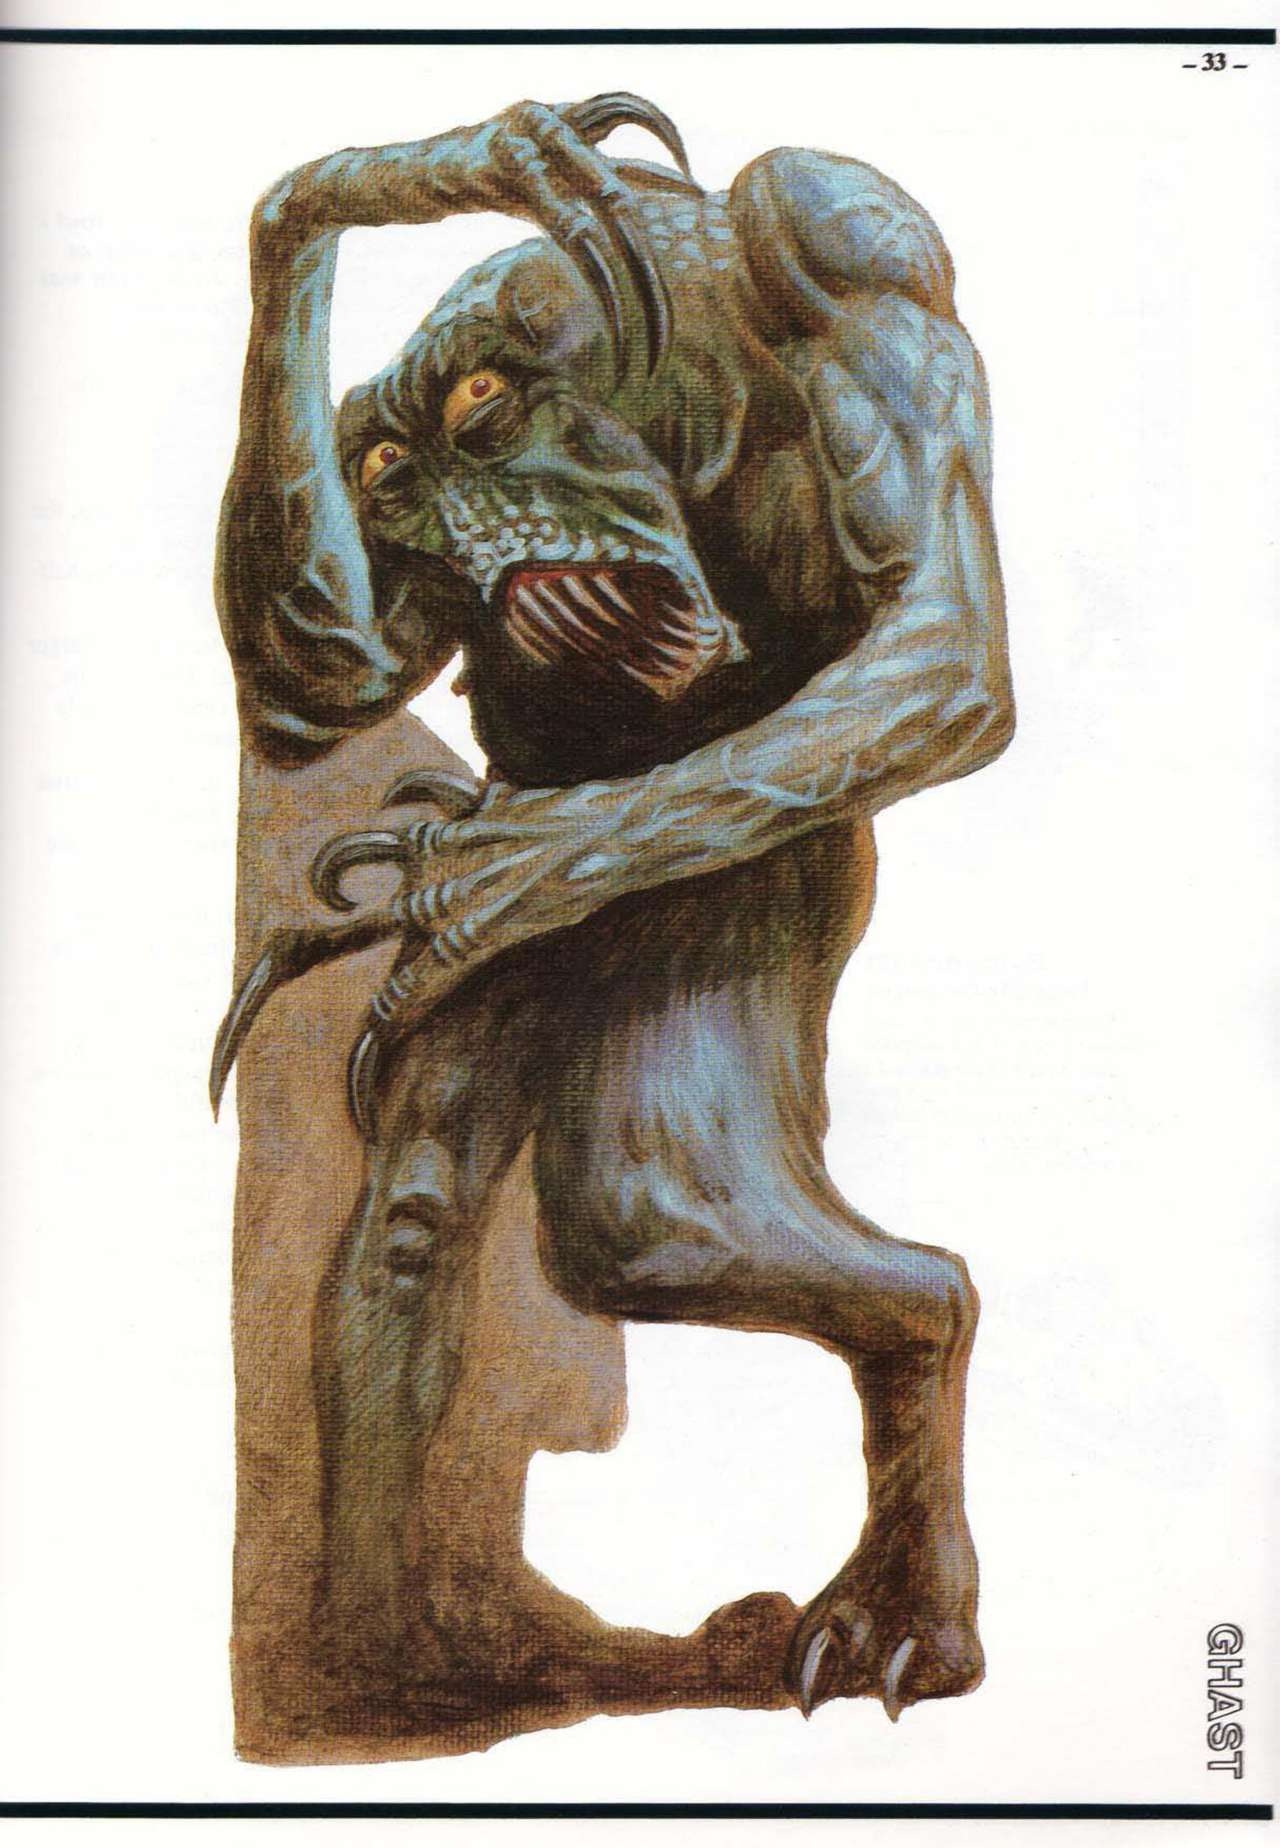 S. Petersen's Field Guide to Cthulhu Monsters 32